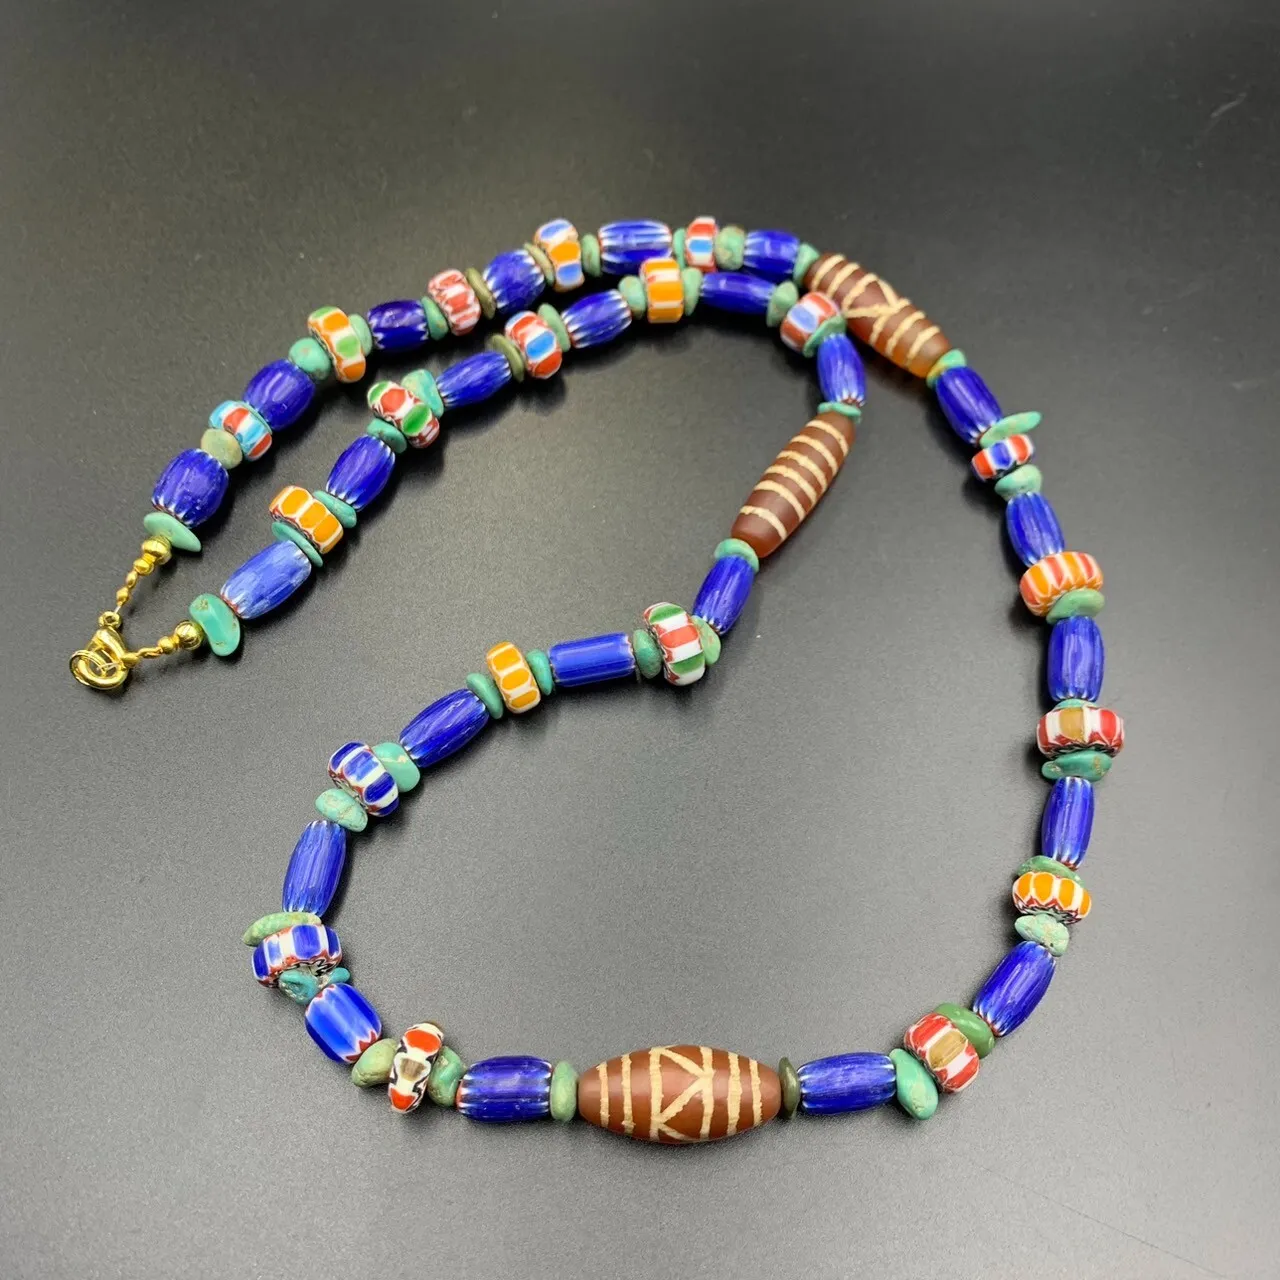 Beautiful Chevron Trade Glass Beads With Antique Etched Agate Beads Necklace, LBBR-30 - Image 2 of 6